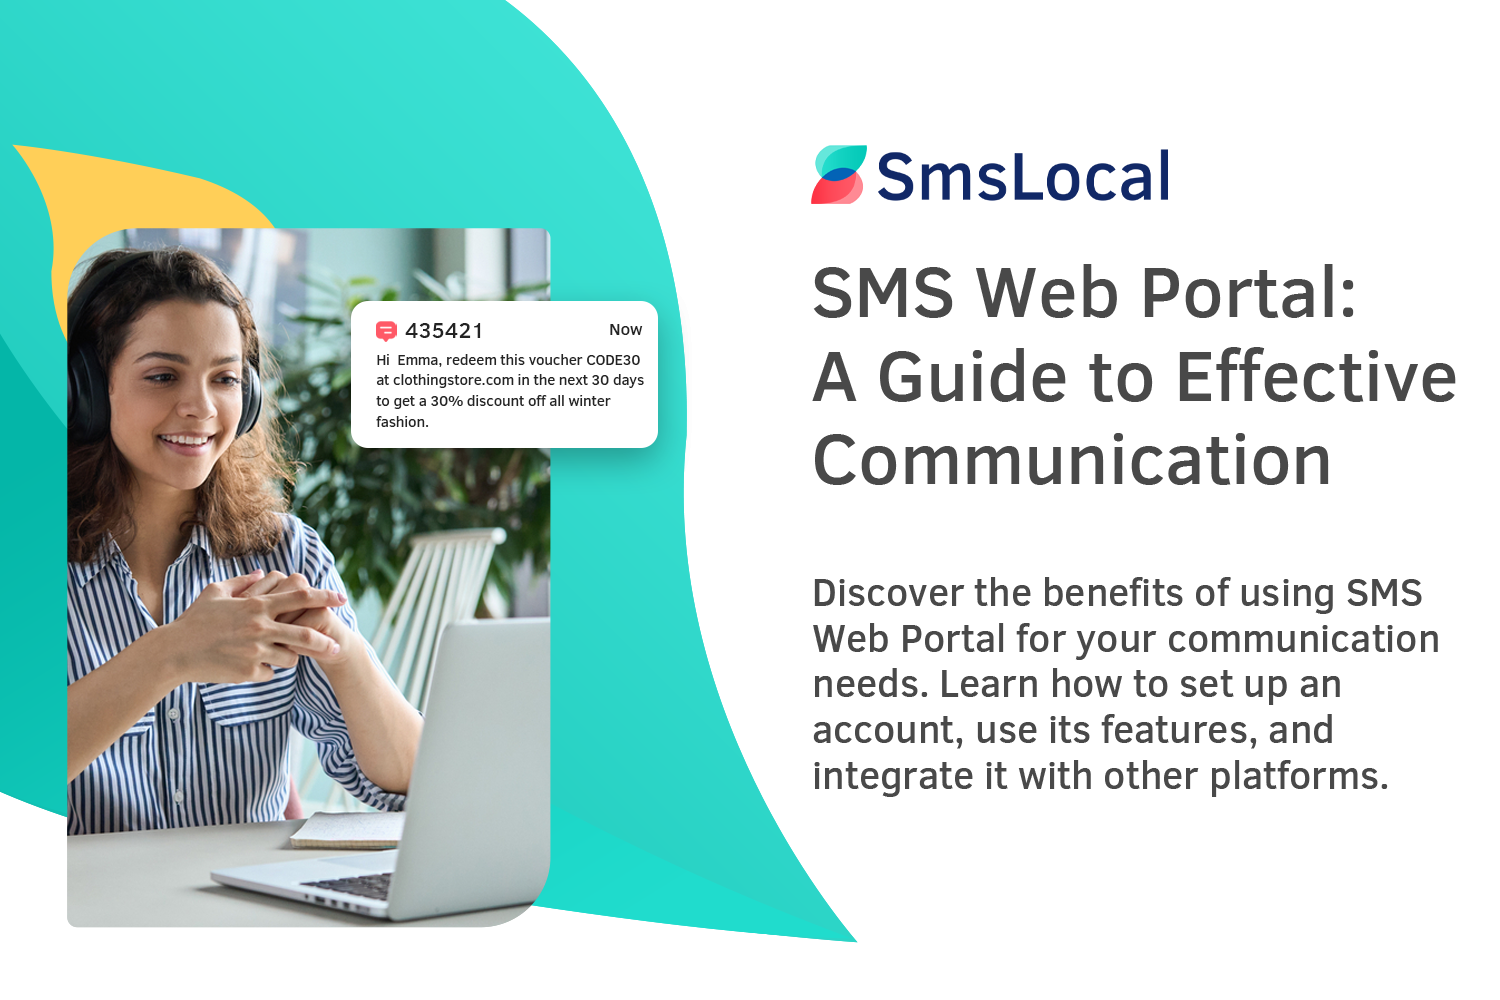 SMS-Web-Portal--A-Guide-to-Effective-Communication